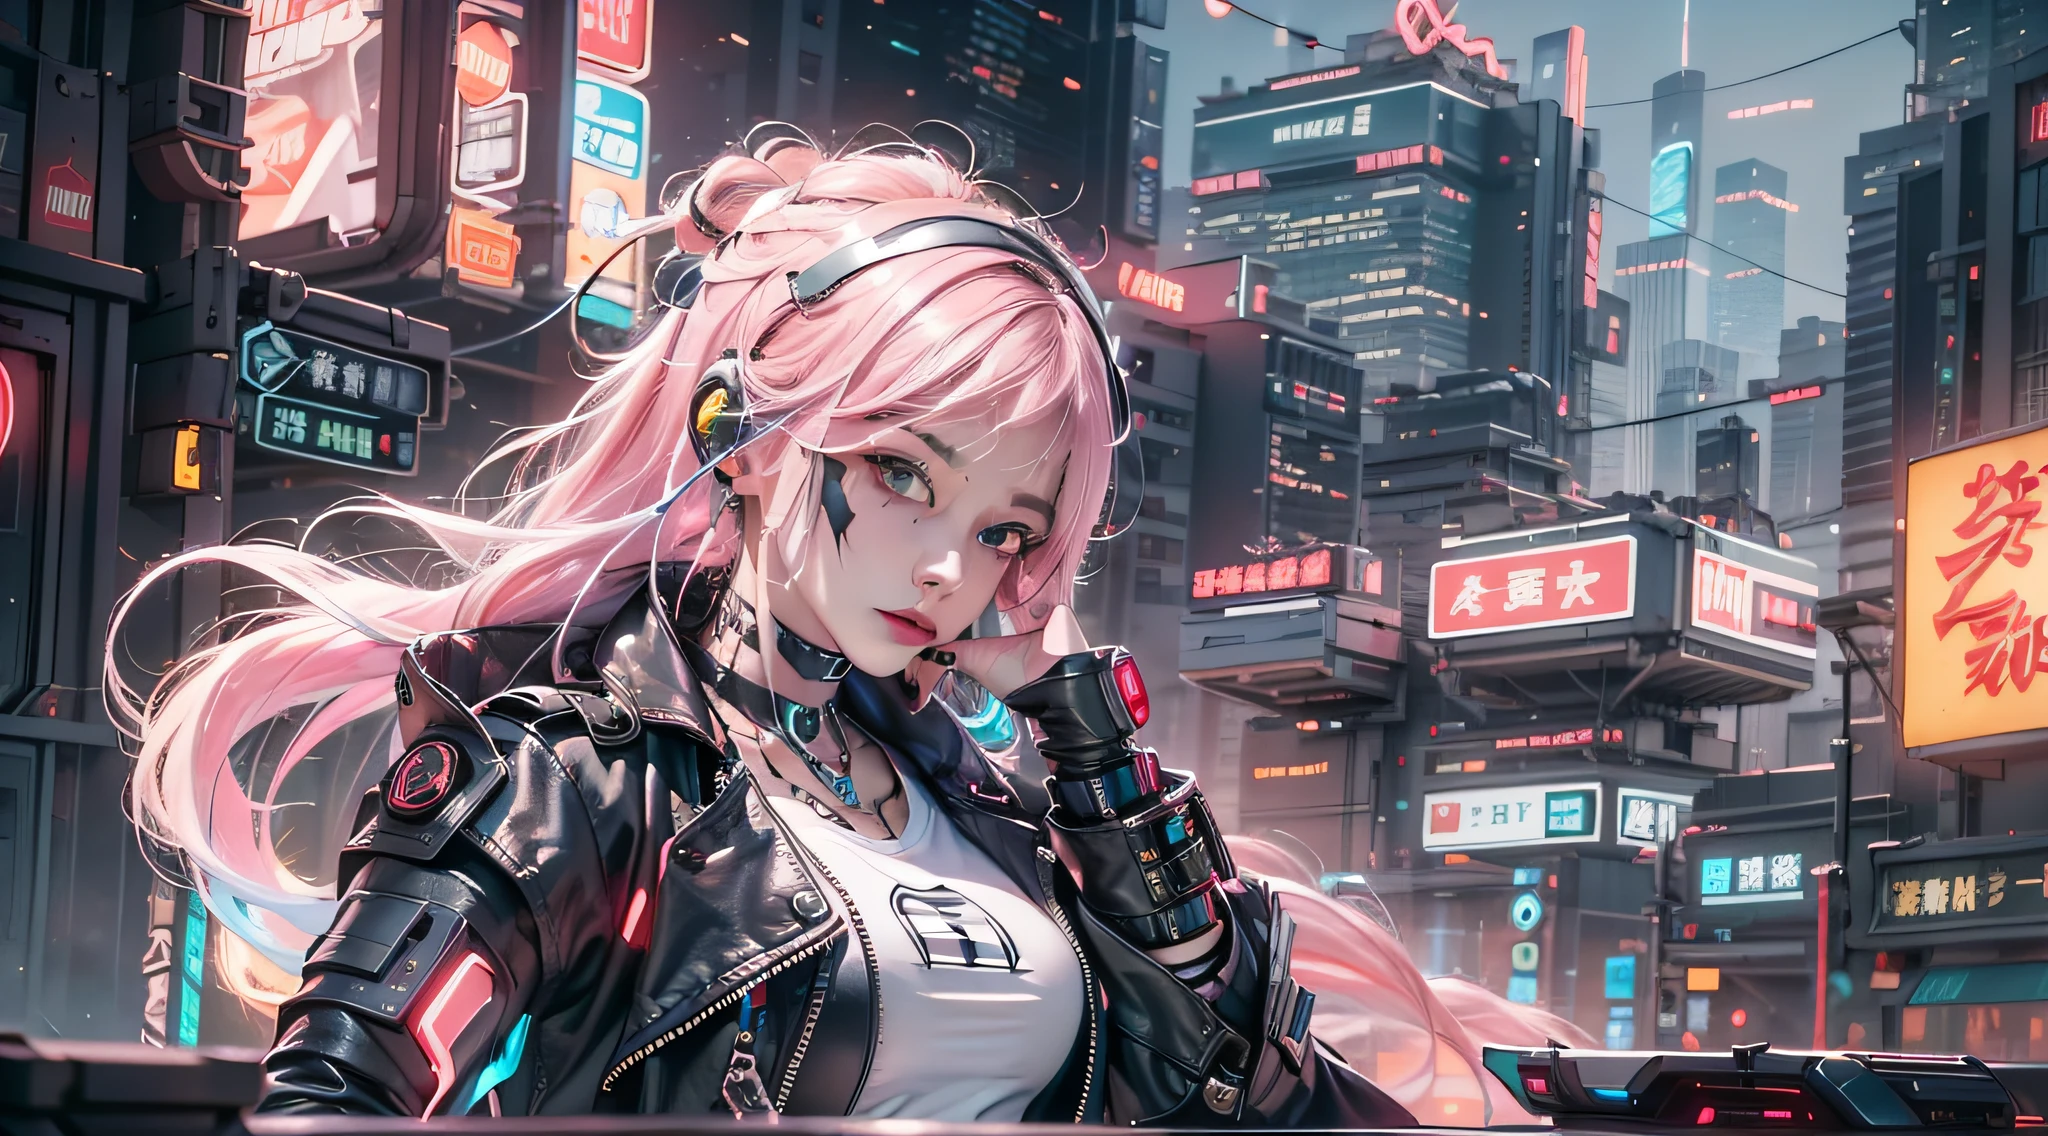 [Ultra-detailed realistic images], [​masterpiece], Cyberpunk girl with short and pointed pink hair, Bright green eye and neck circuit tattoo. She wears a black leather coat with neon accents, Torn white blouse, Gray jeans and black boots. She has a bionic arm with metal claws and a neural interface implant in her right temple. She holds a laser pistol in her left hand.、Hold a holographic device in your right hand. She is on the busy streets of a futuristic city, Surrounded by skyscrapers, Huge dough, Flying cars and people of different styles and ethnicities々. She has a confident and defiant look, As if ready to face danger.